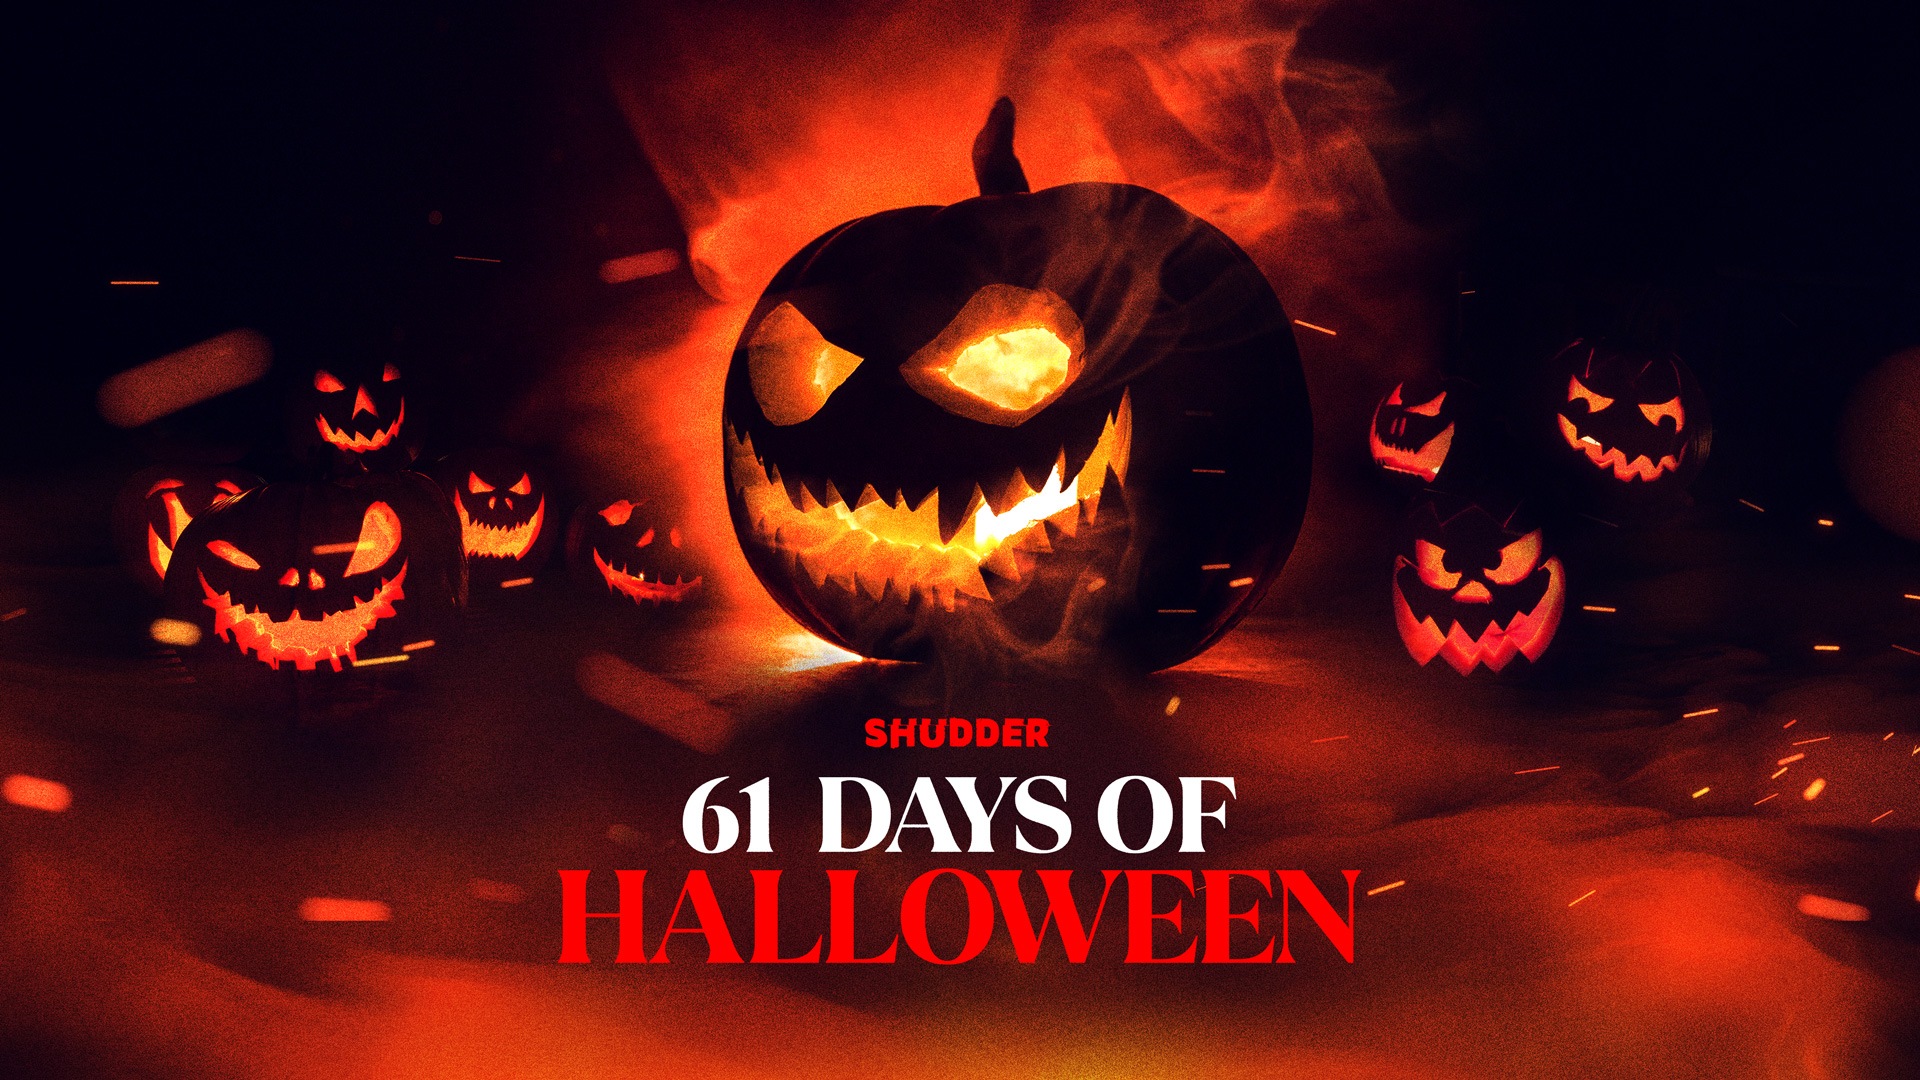 Spooky Season has Started Early with Shudder’s 61 Days of Halloween